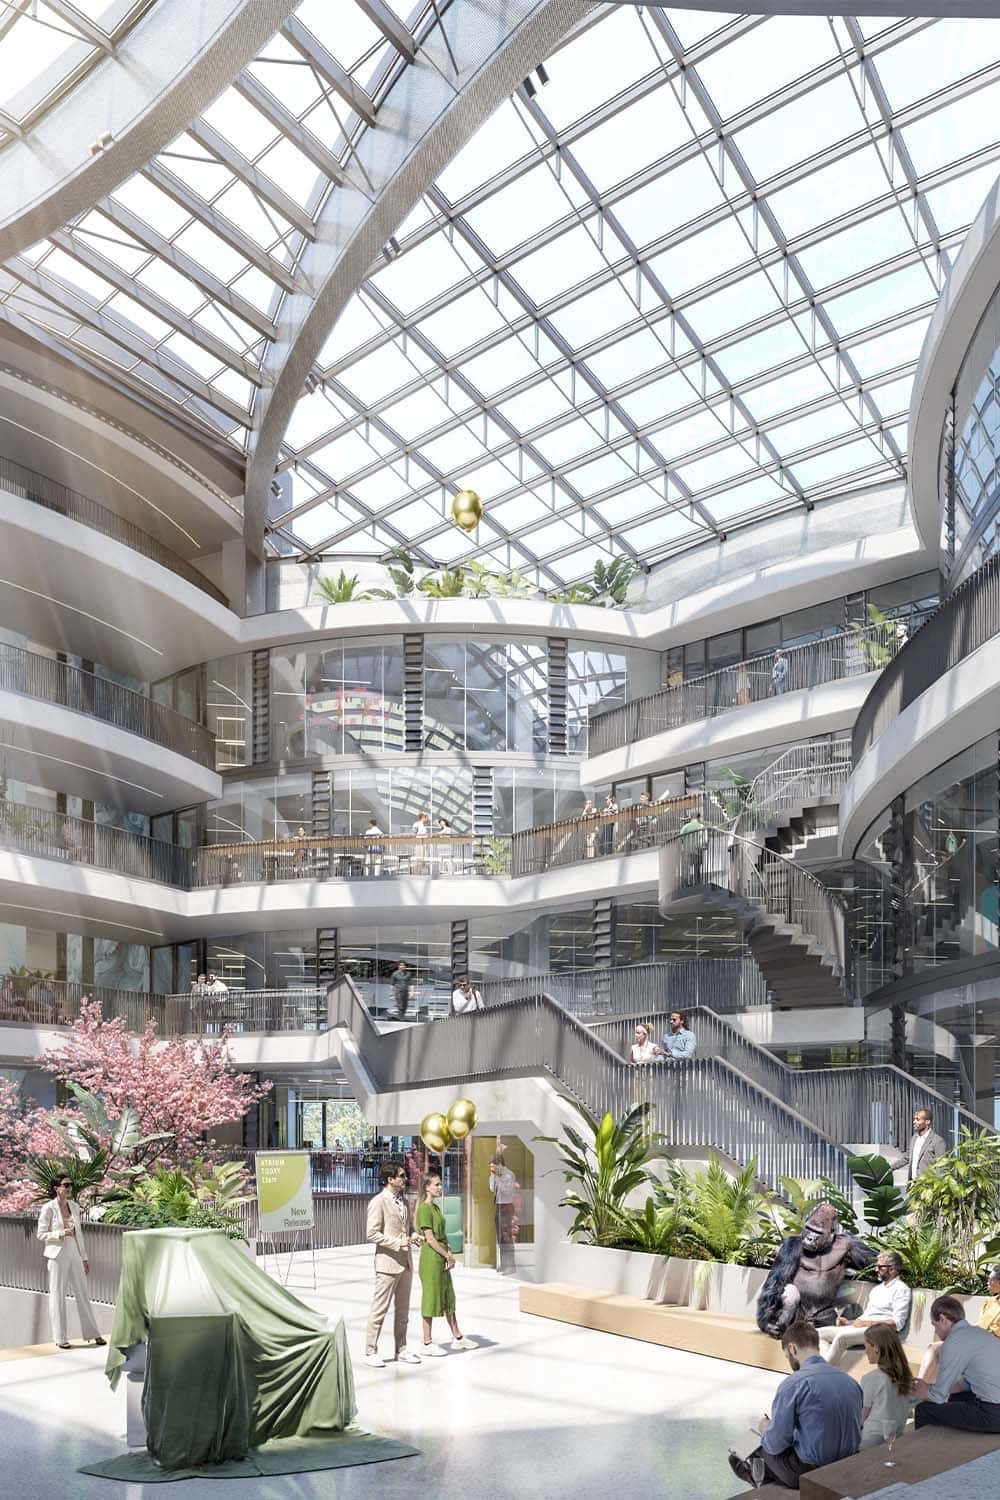 The indoor garden is located in the heart of the building. Unplanned interactions are characteristics of the space and give it an active vibe.